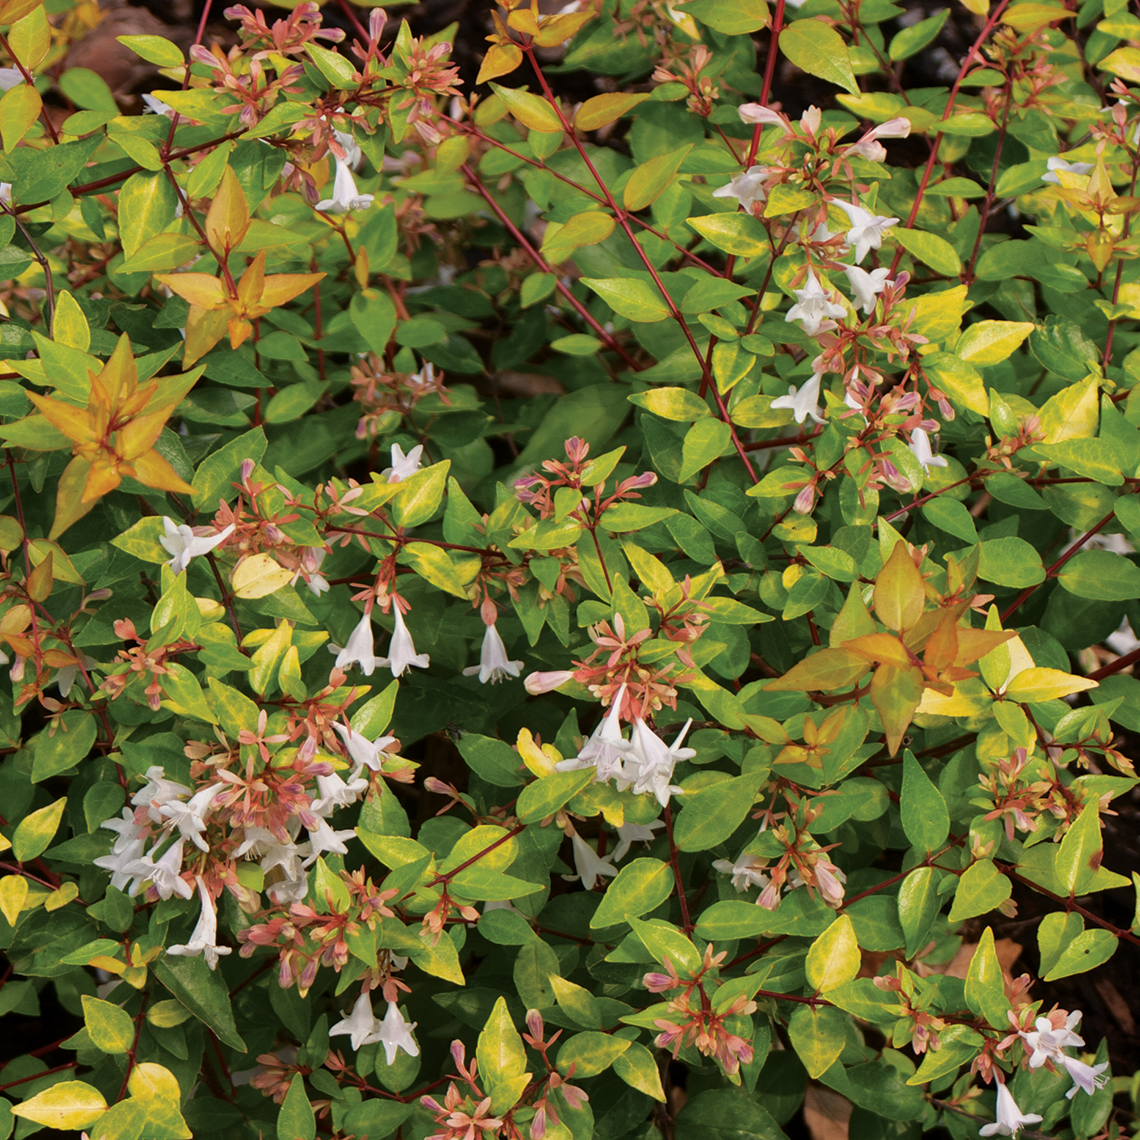 Close up of Bronze Anniversary Abelia's flowers and copper-colored foliage